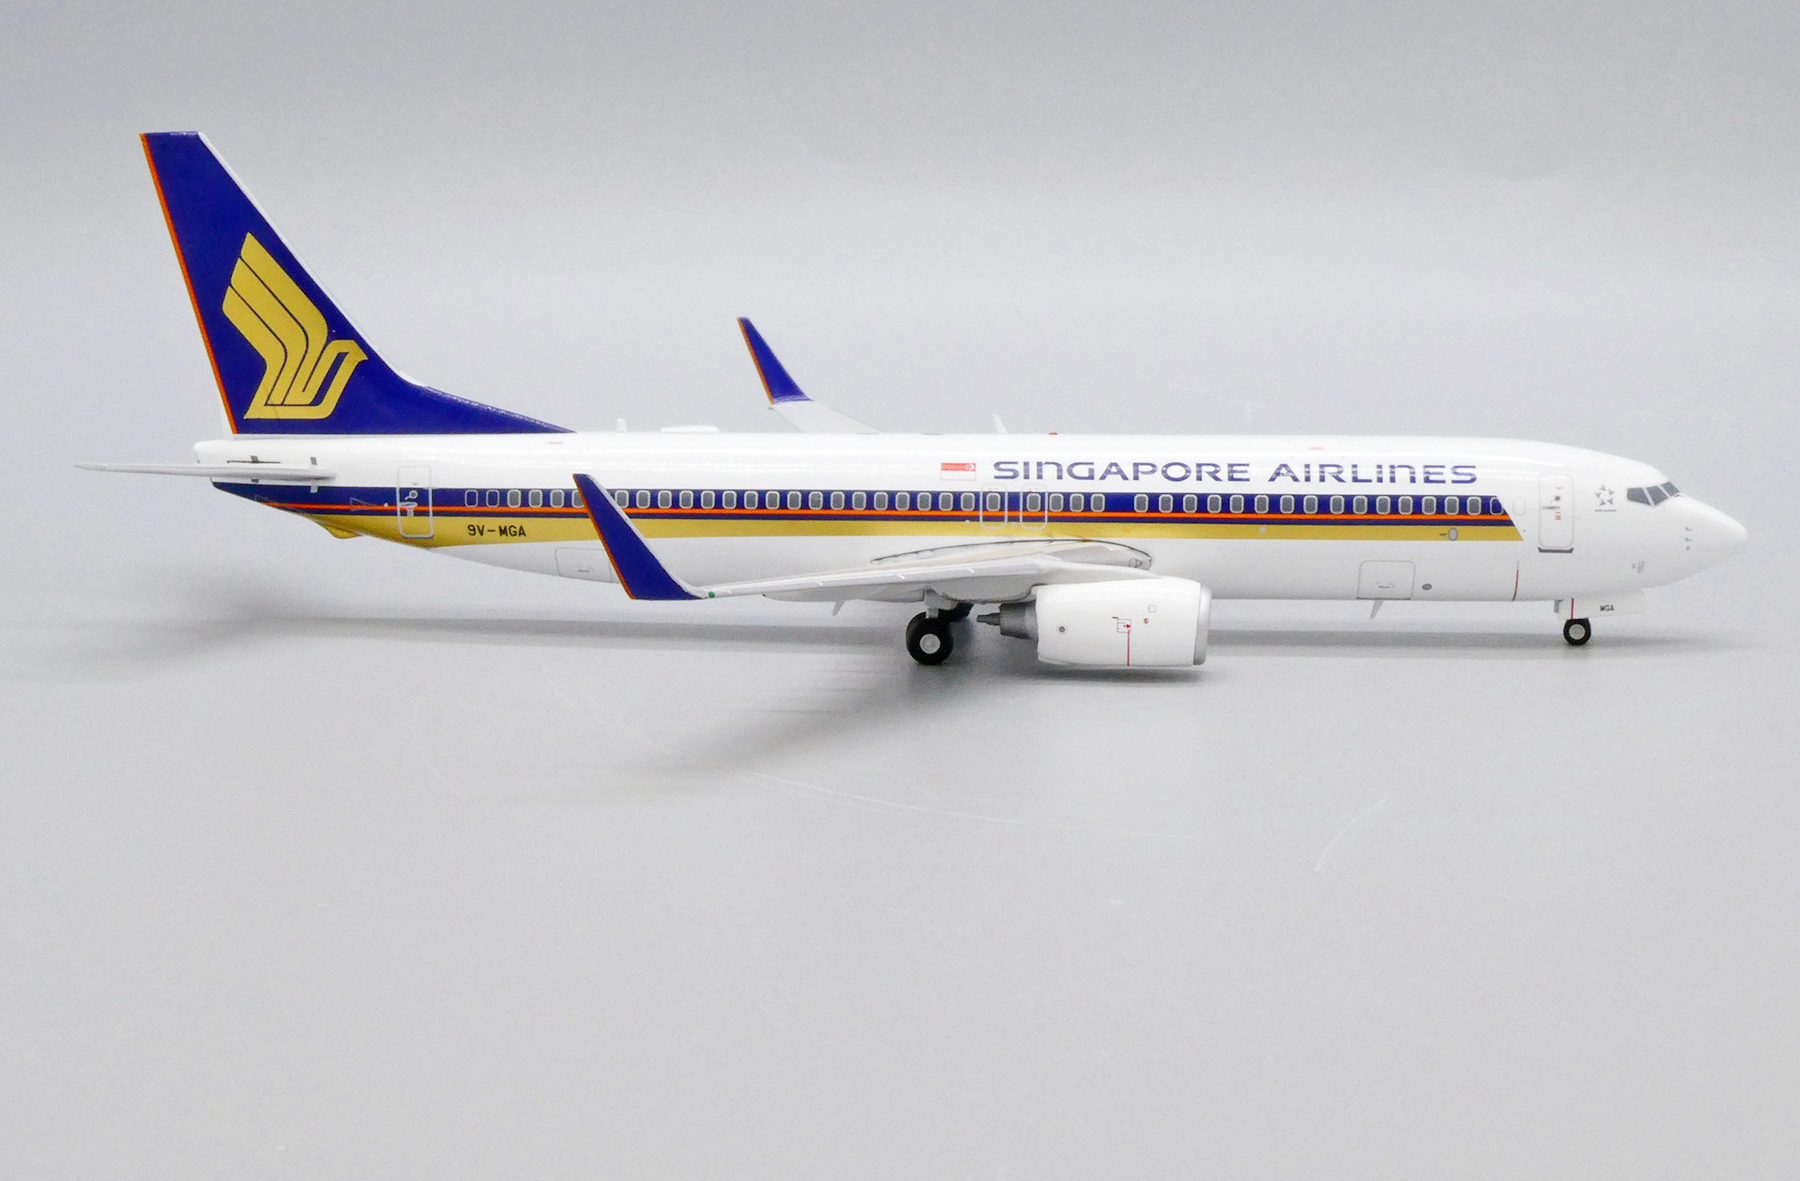 JC WINGS JCEW2738015 1/200 SINGAPORE AIRLINES B737-800 REG 9V-MGA WITH STAND